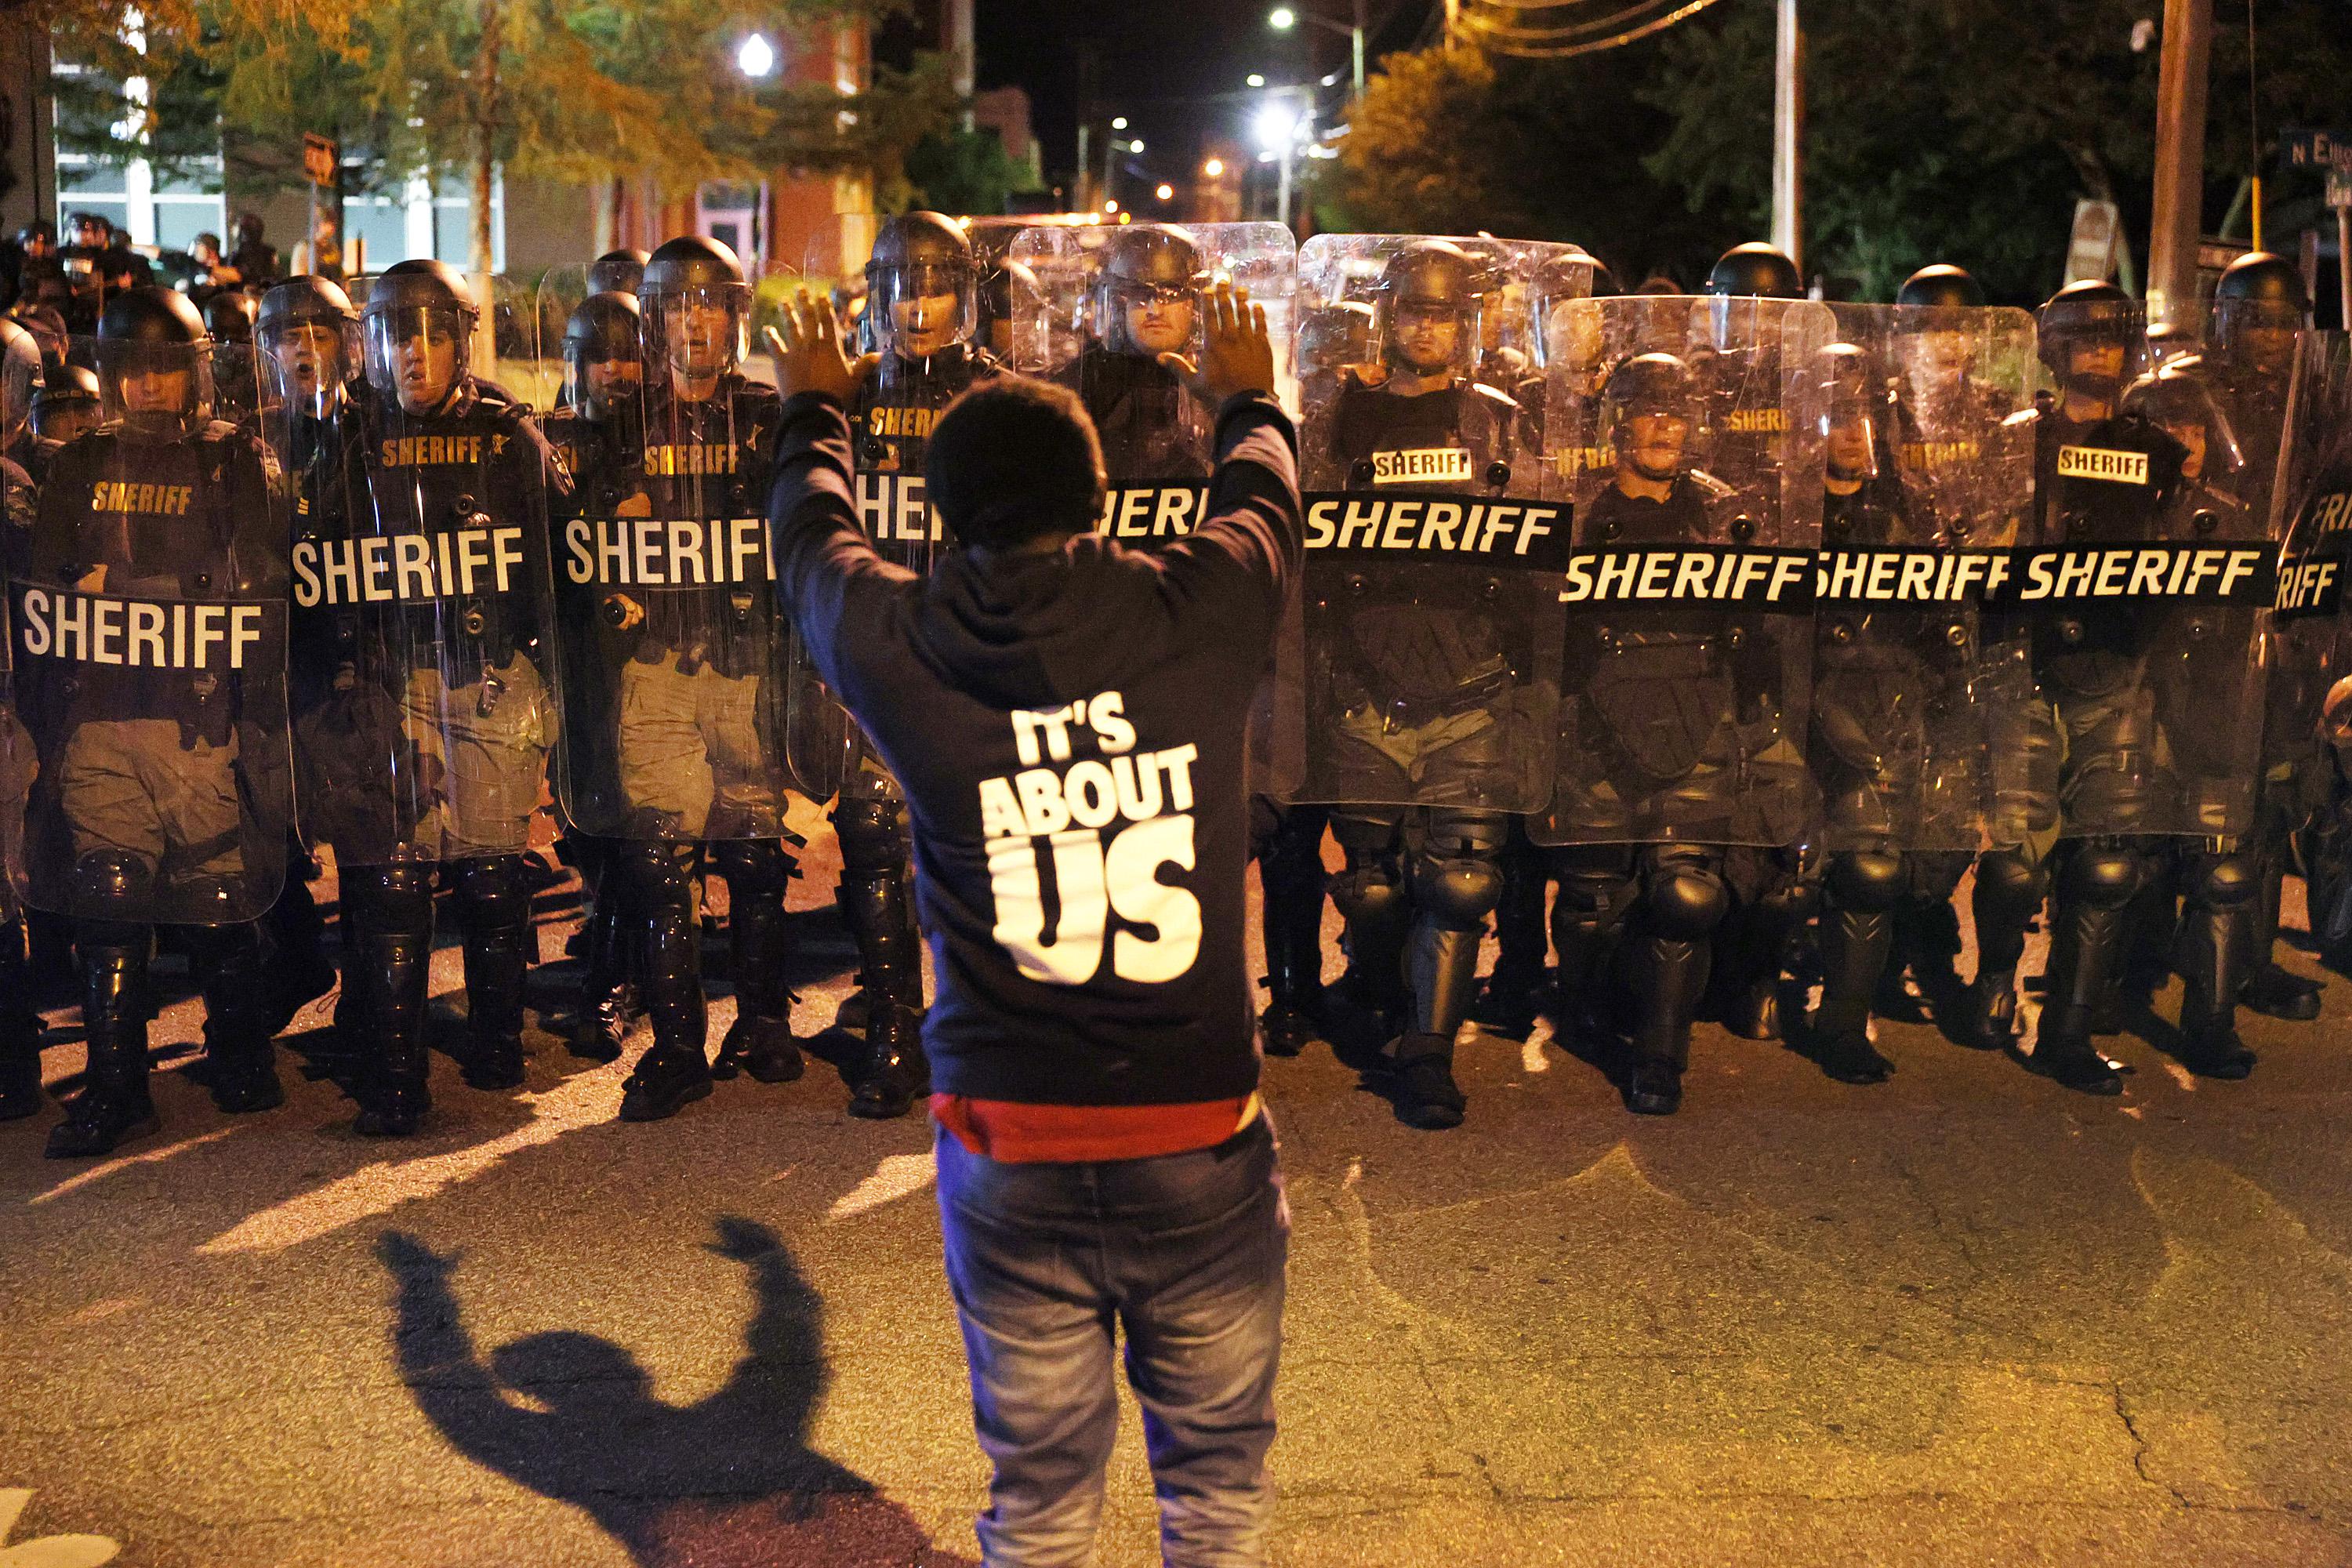 A protester stands with his arms raised in front of a line of law enforcement officials in riot gear.